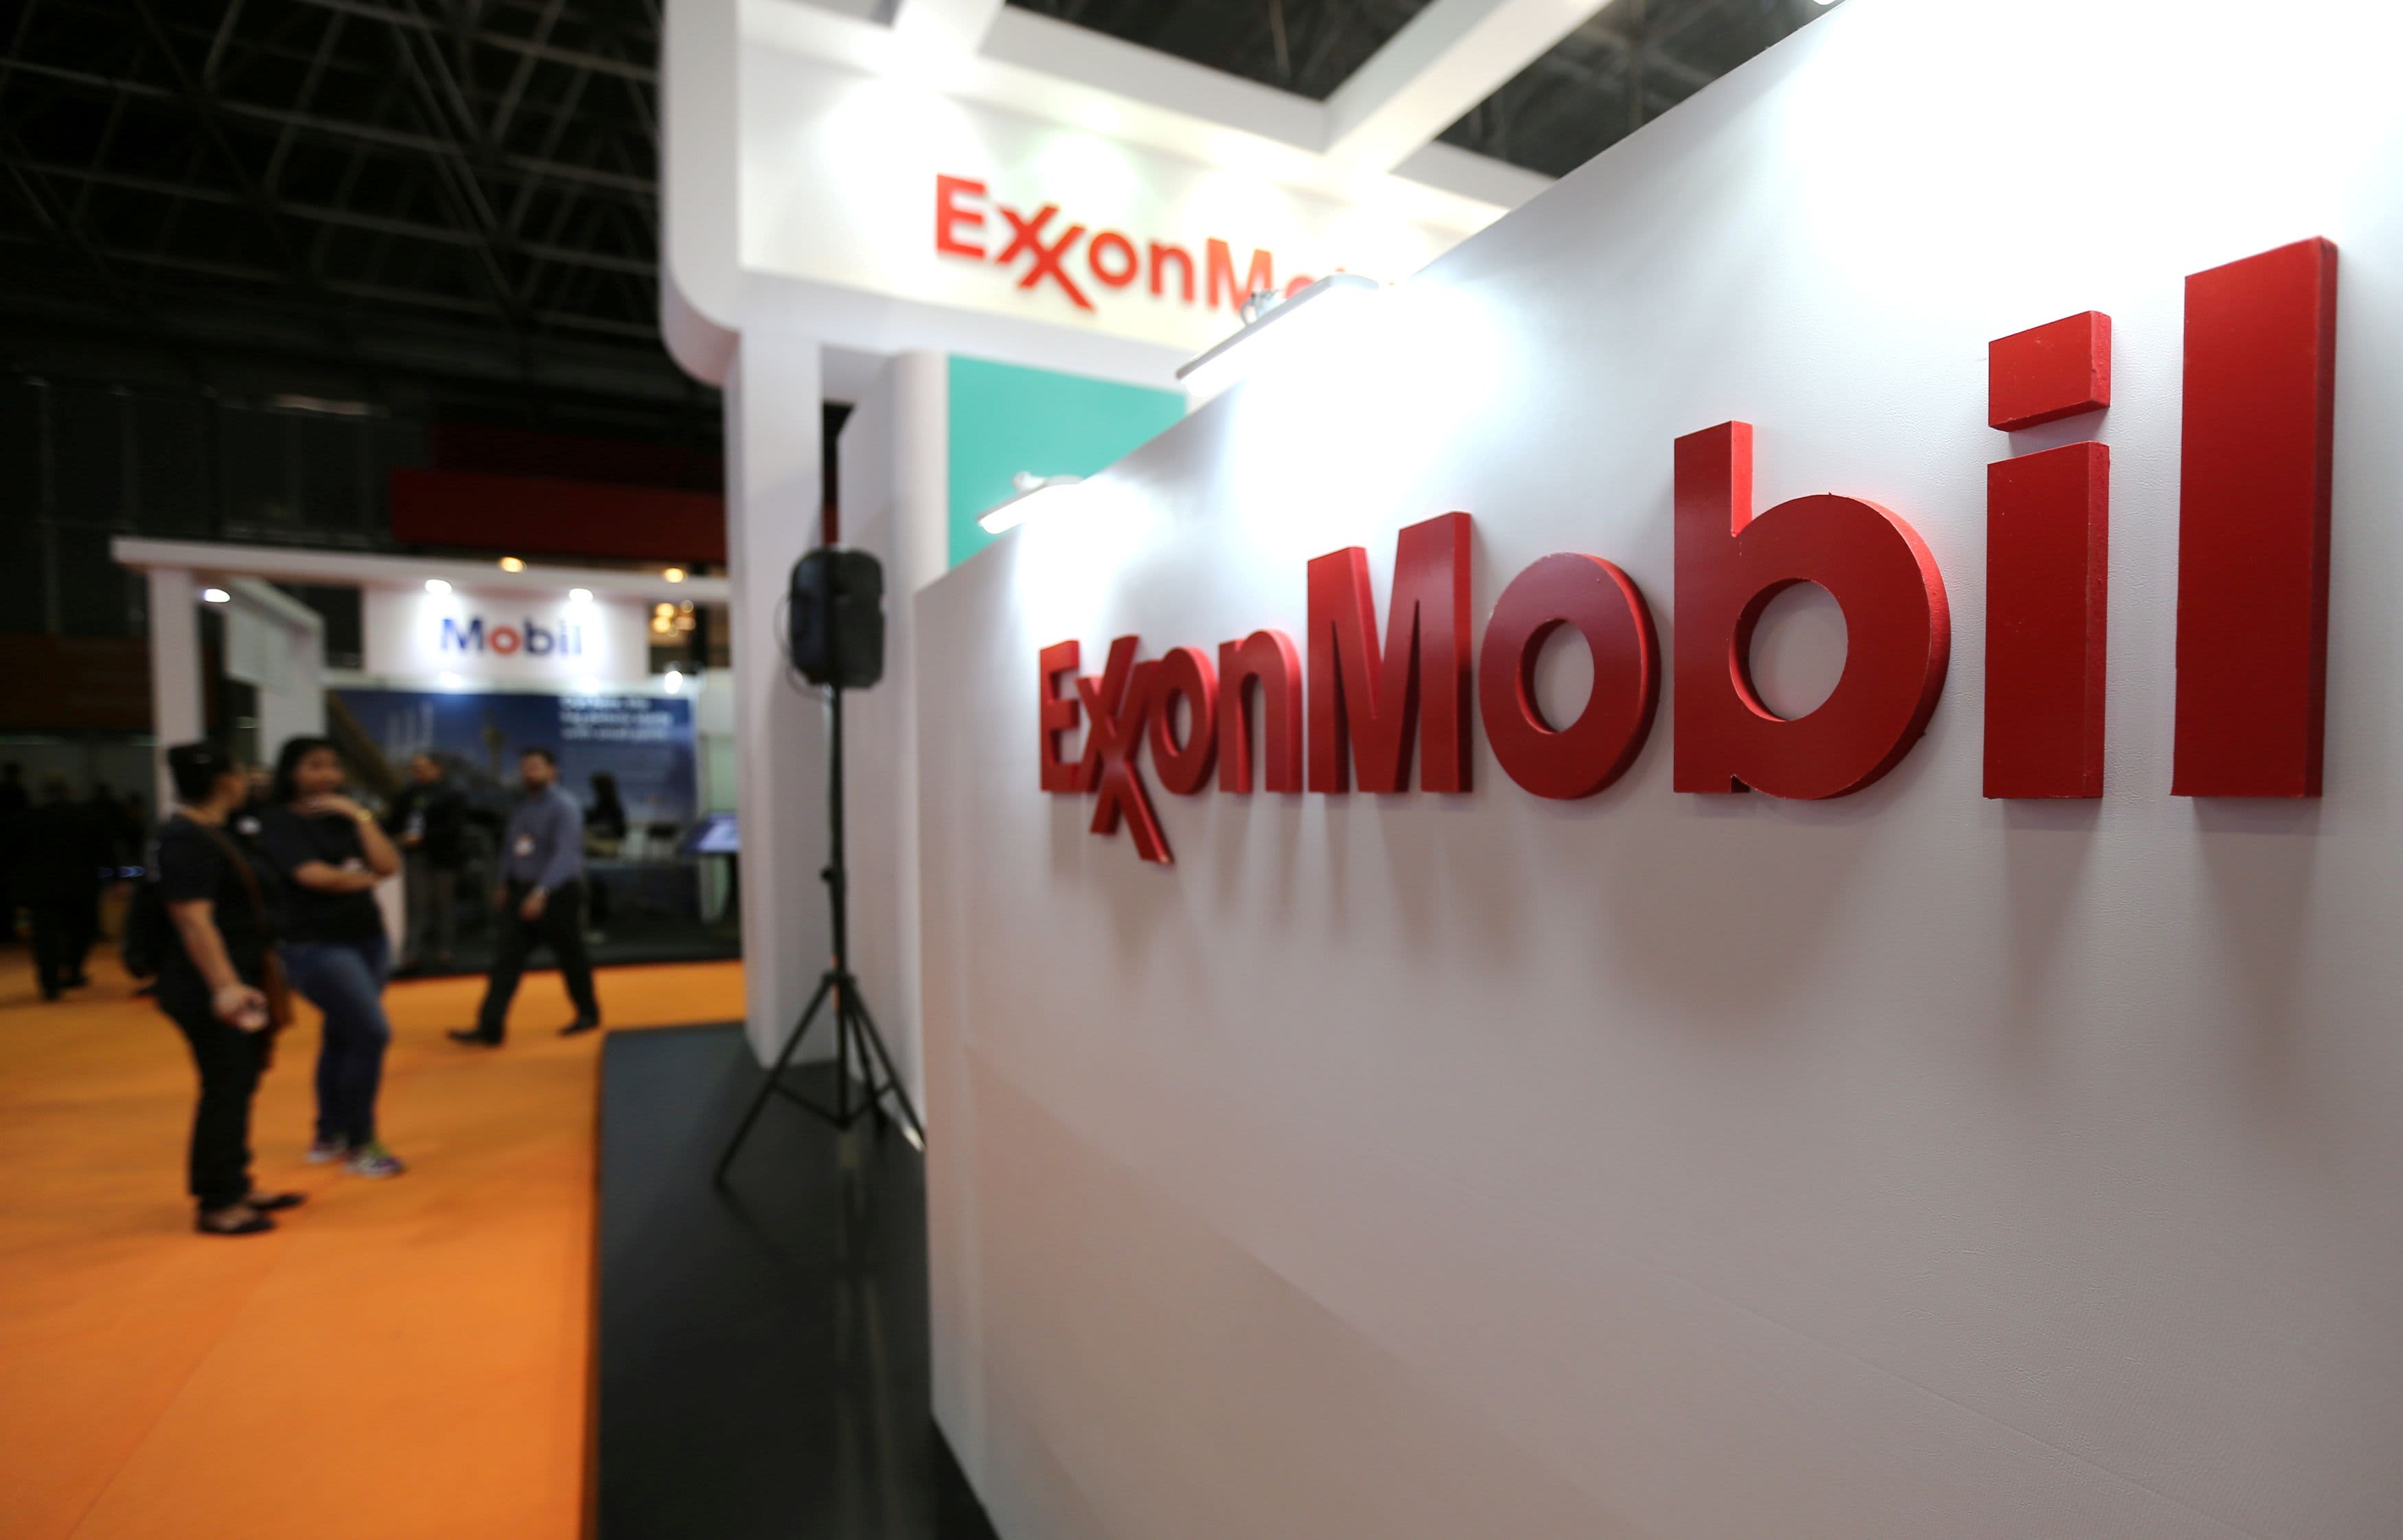 Exxon forecasts doubling earnings and cash flow by 2027 while reducing emissions – CNBC